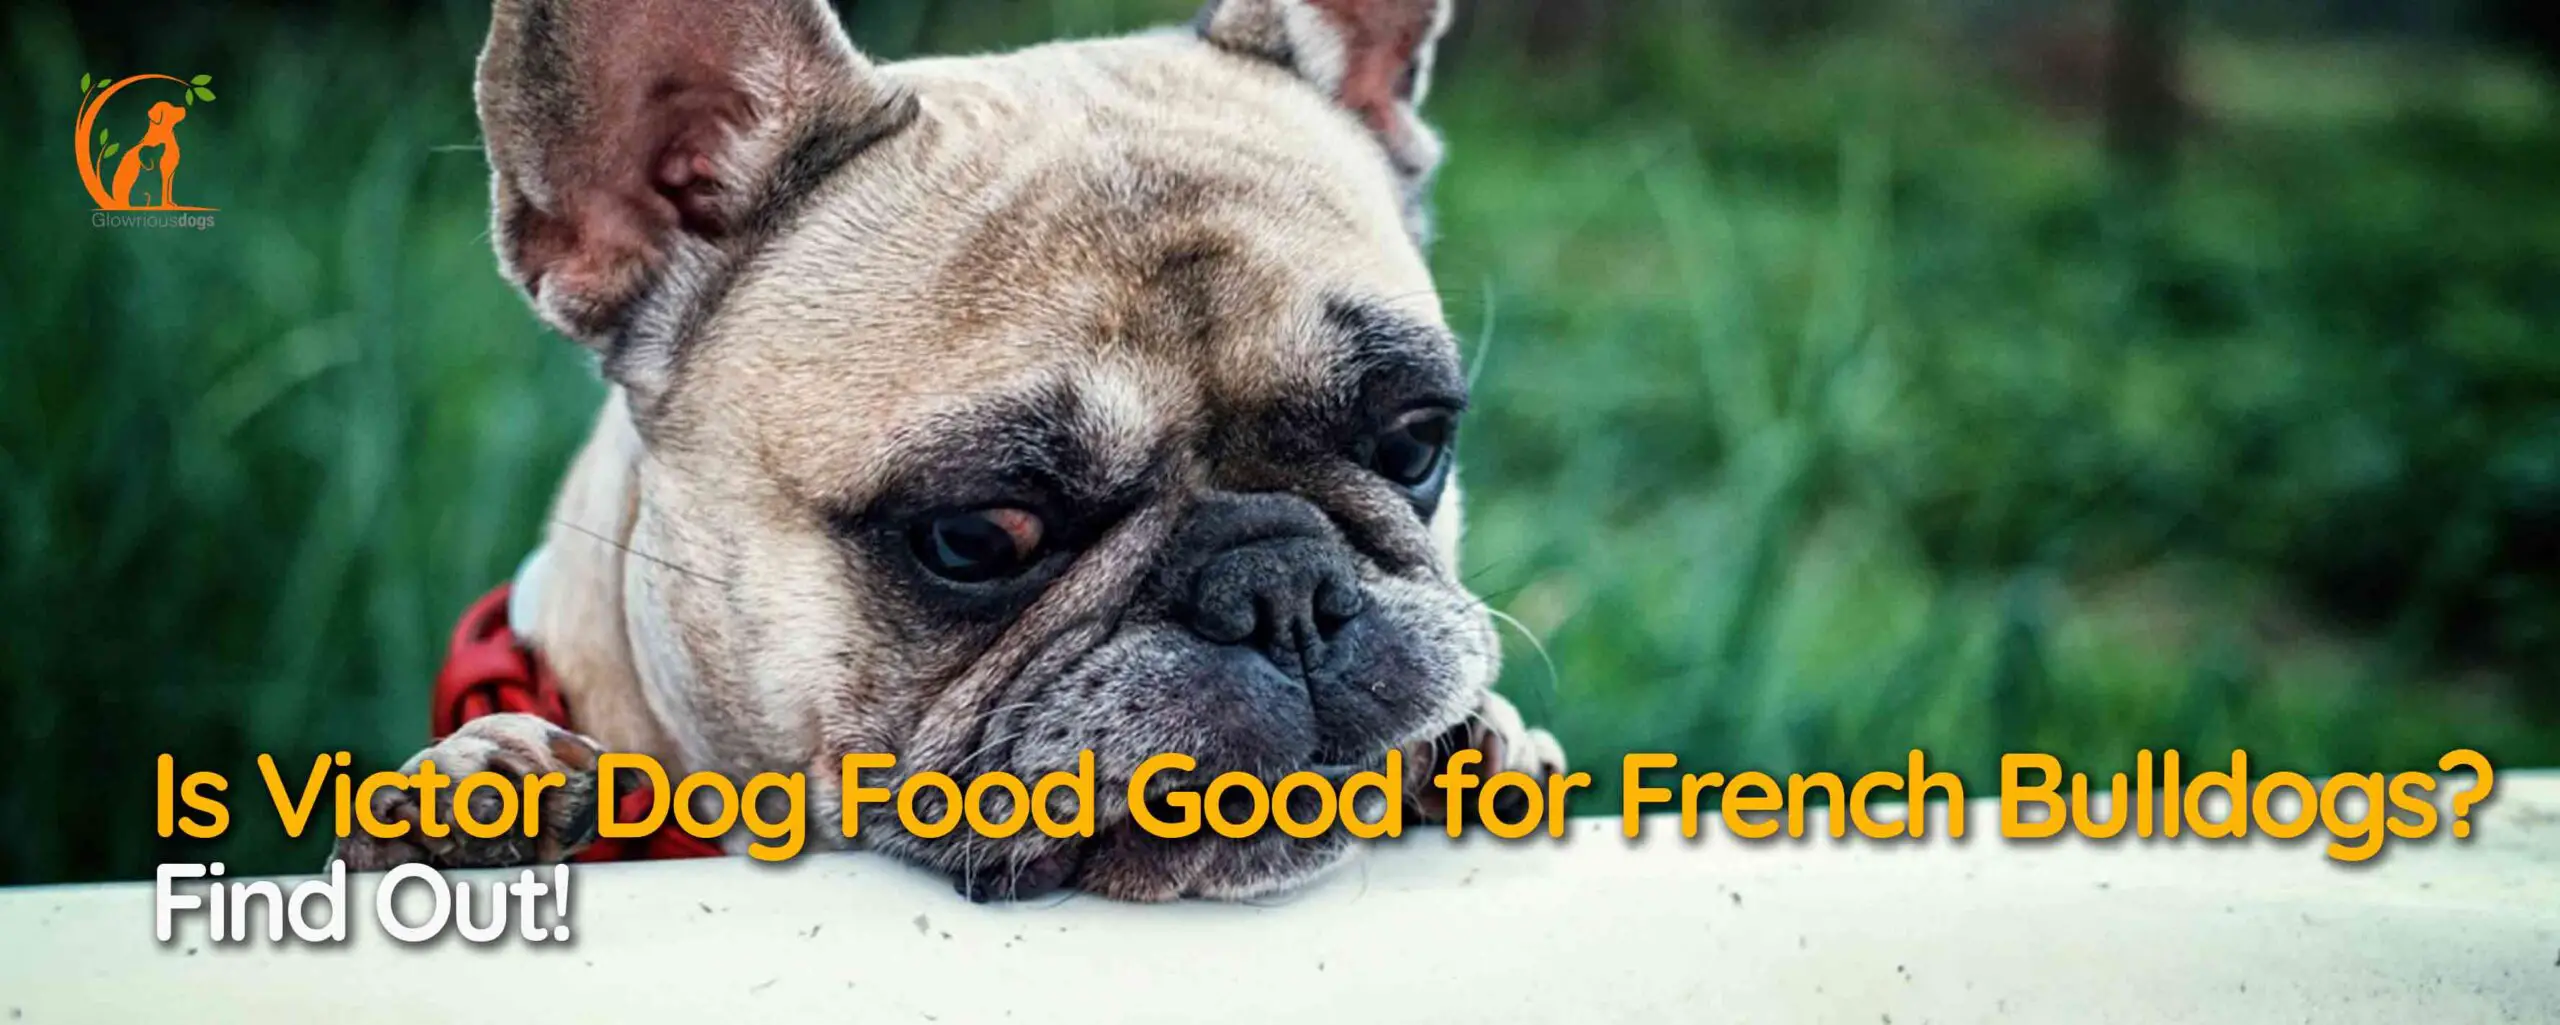 Is Victor Dog Food Good for French Bulldogs? Find Out!